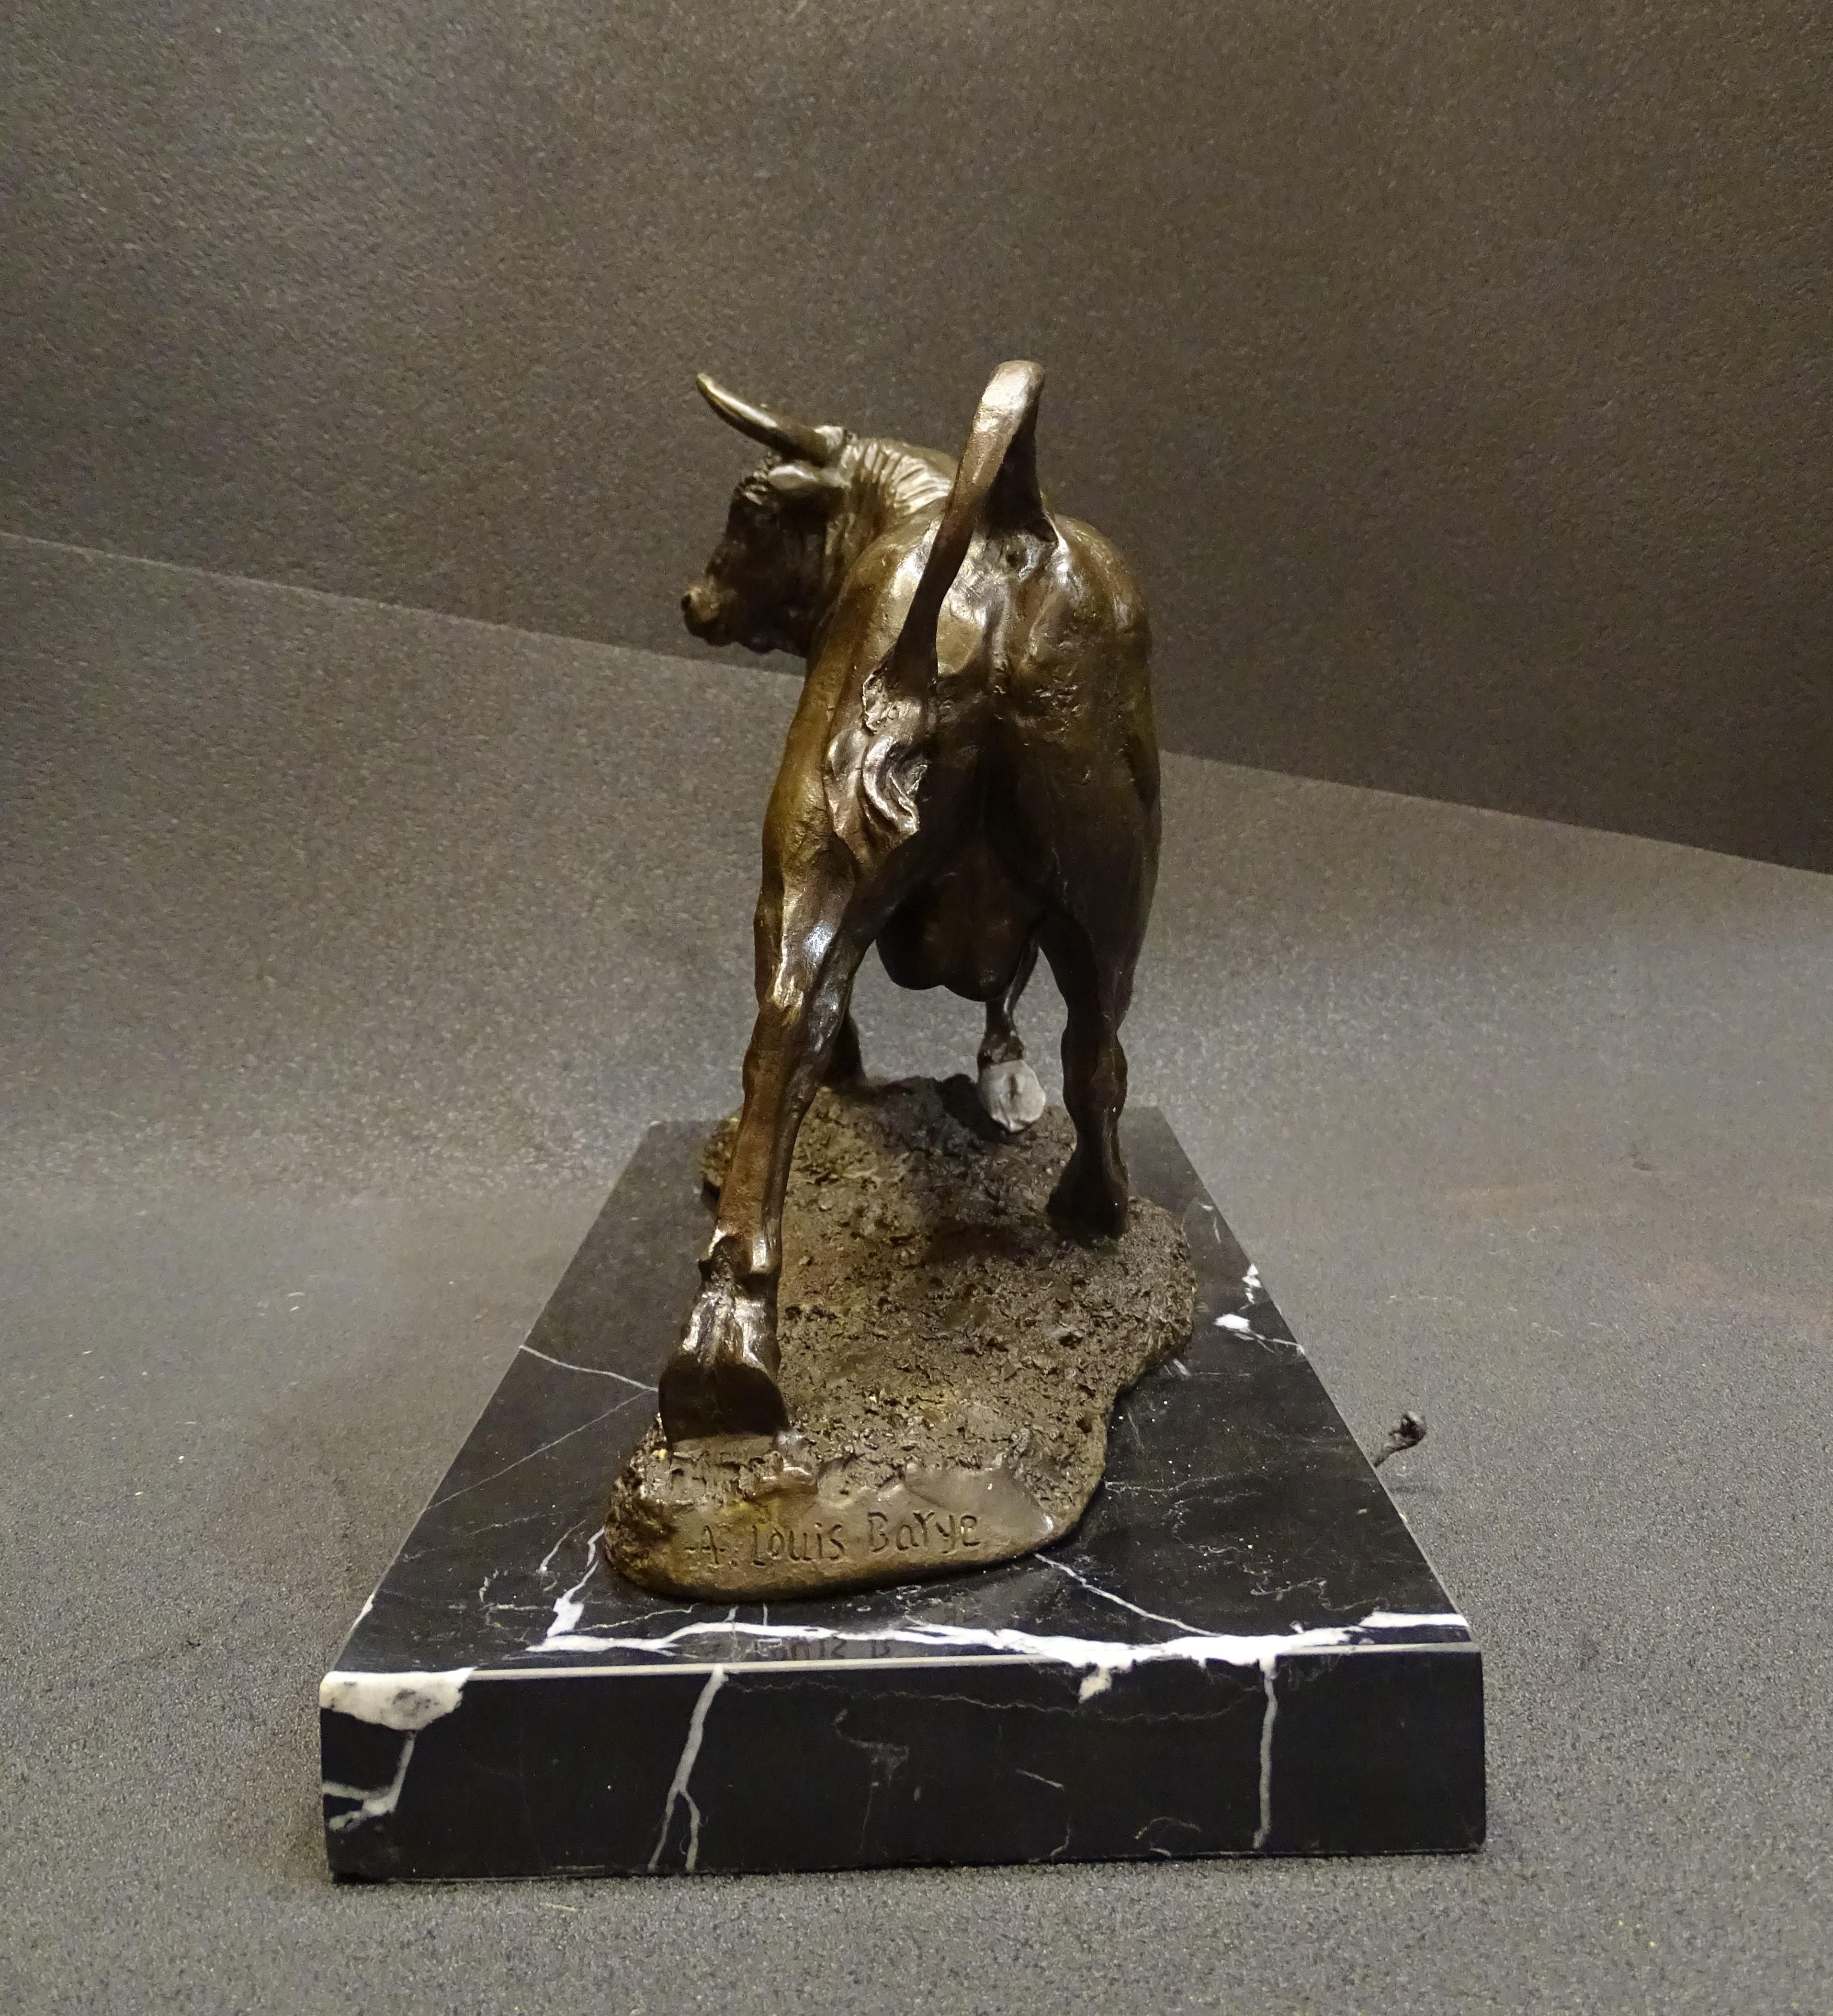 French 19th Century Bronze Bull, Animal Sculpture by Barye, Signed